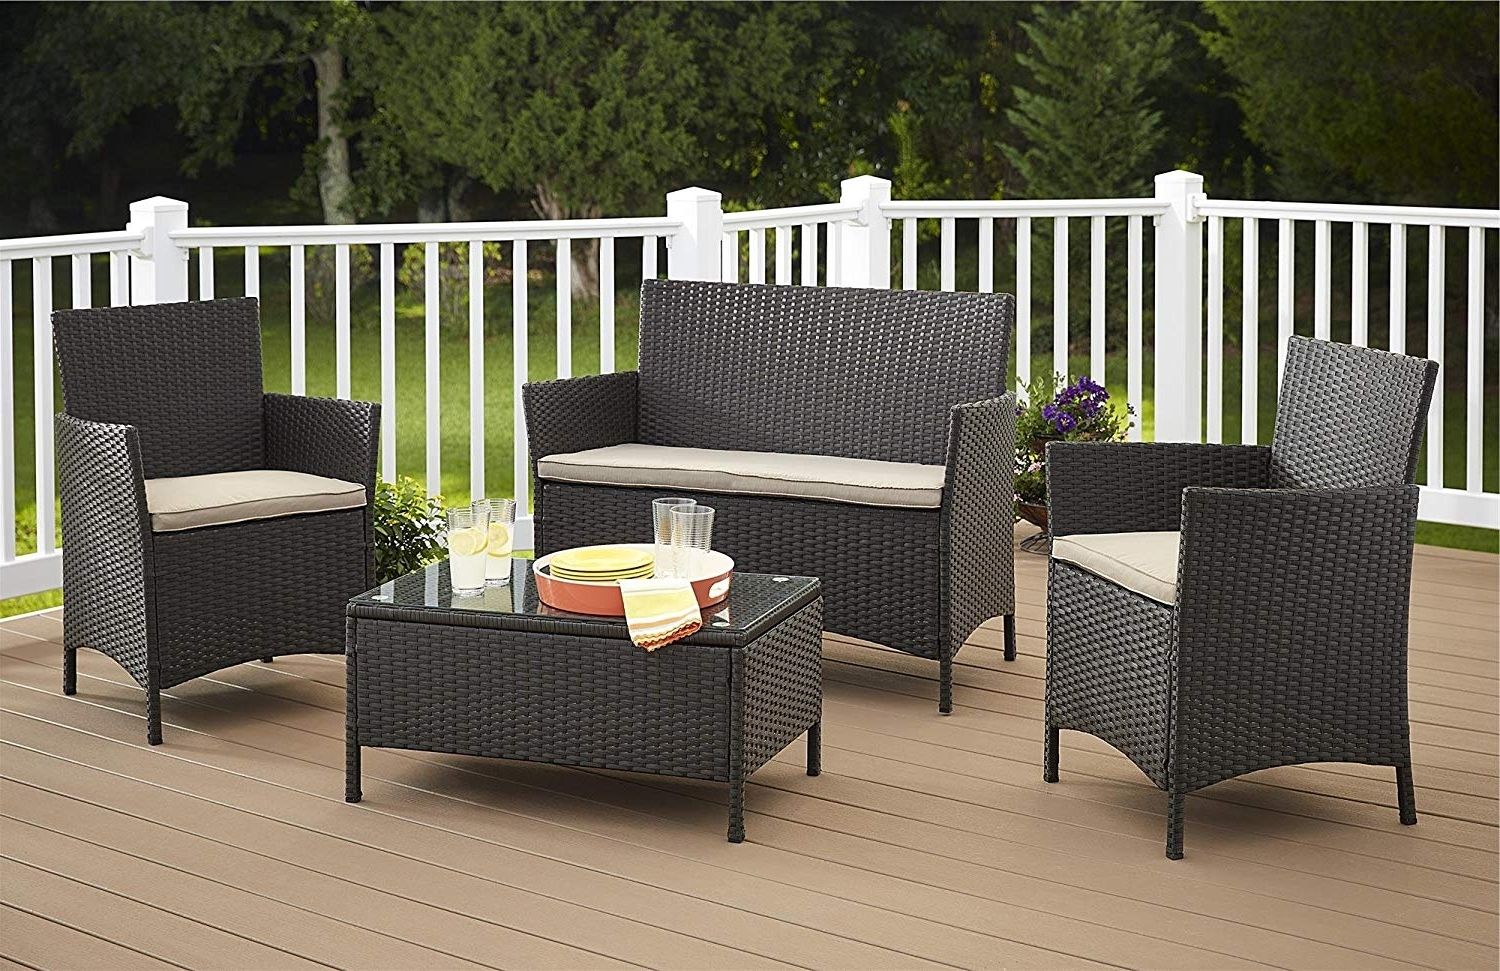 Amazon: Cosco Products 4 Piece Jamaica Resin Wicker Conversation For Well Known Black Patio Conversation Sets (View 1 of 15)